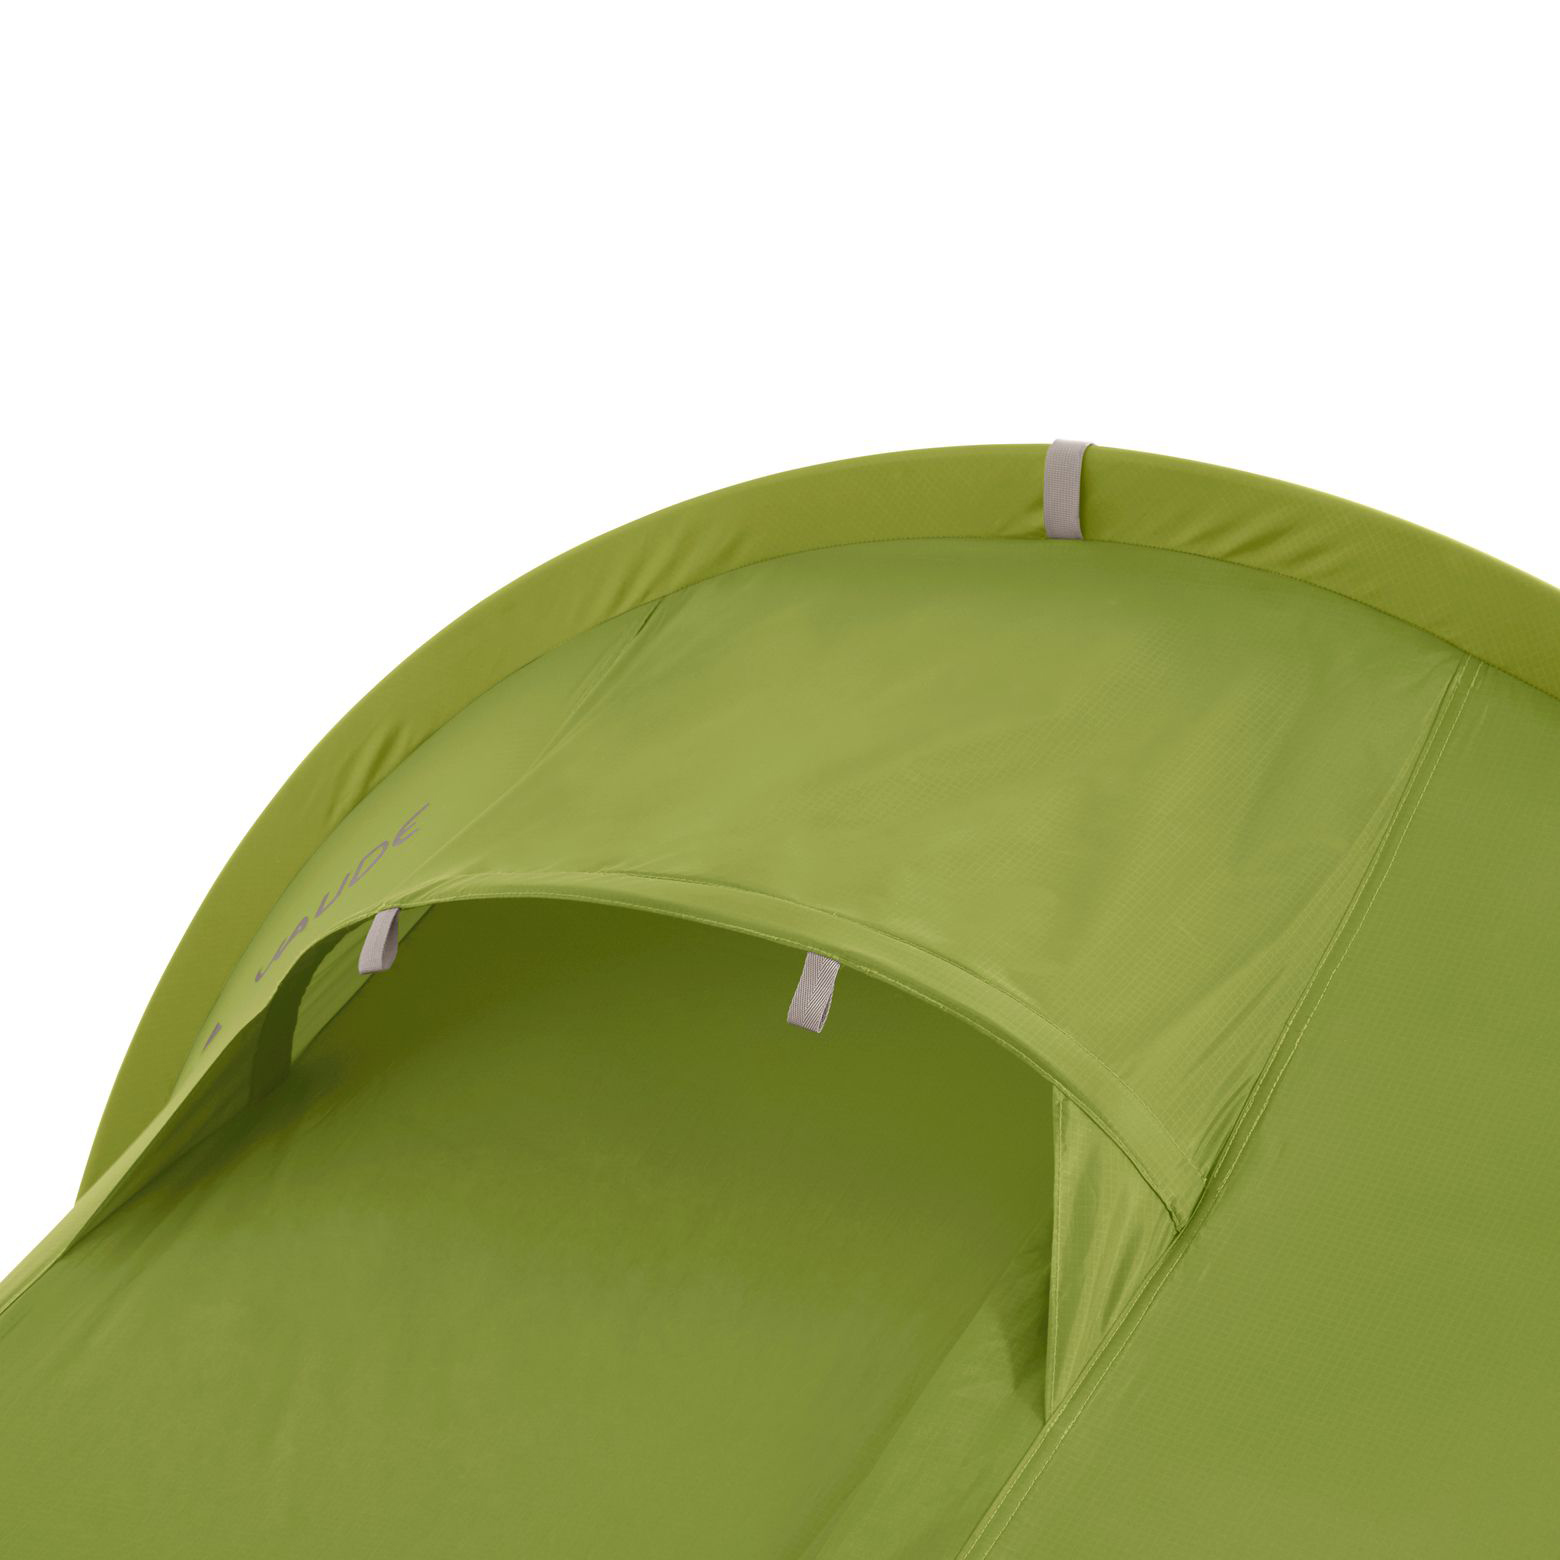 Arco 2P Mossy Green | Buy Arco 2P Mossy Green here | Outnorth